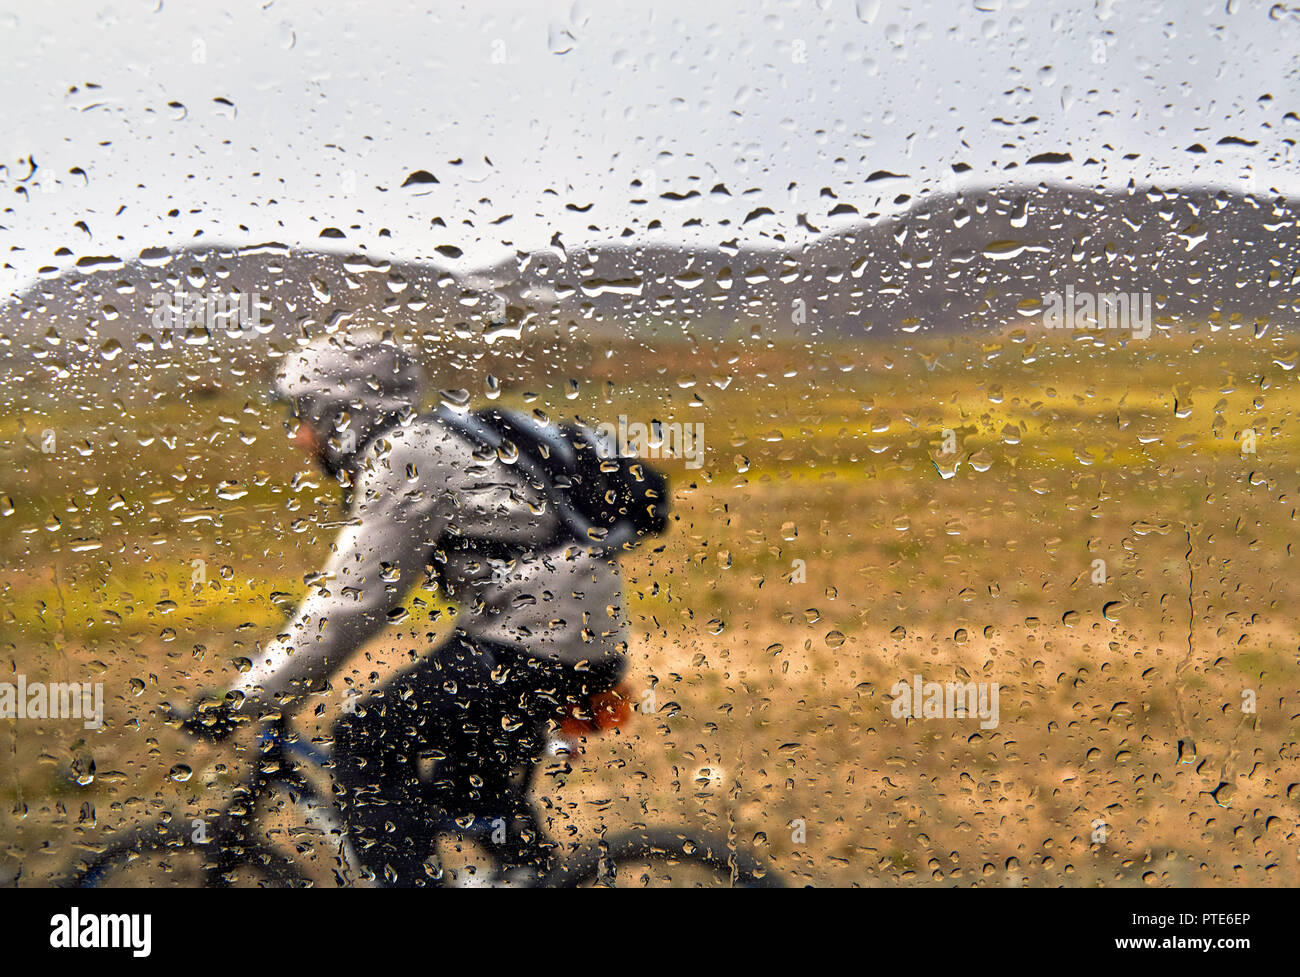 Window in rain drops and man on mountain bike rides on the country road out of focus. Stock Photo